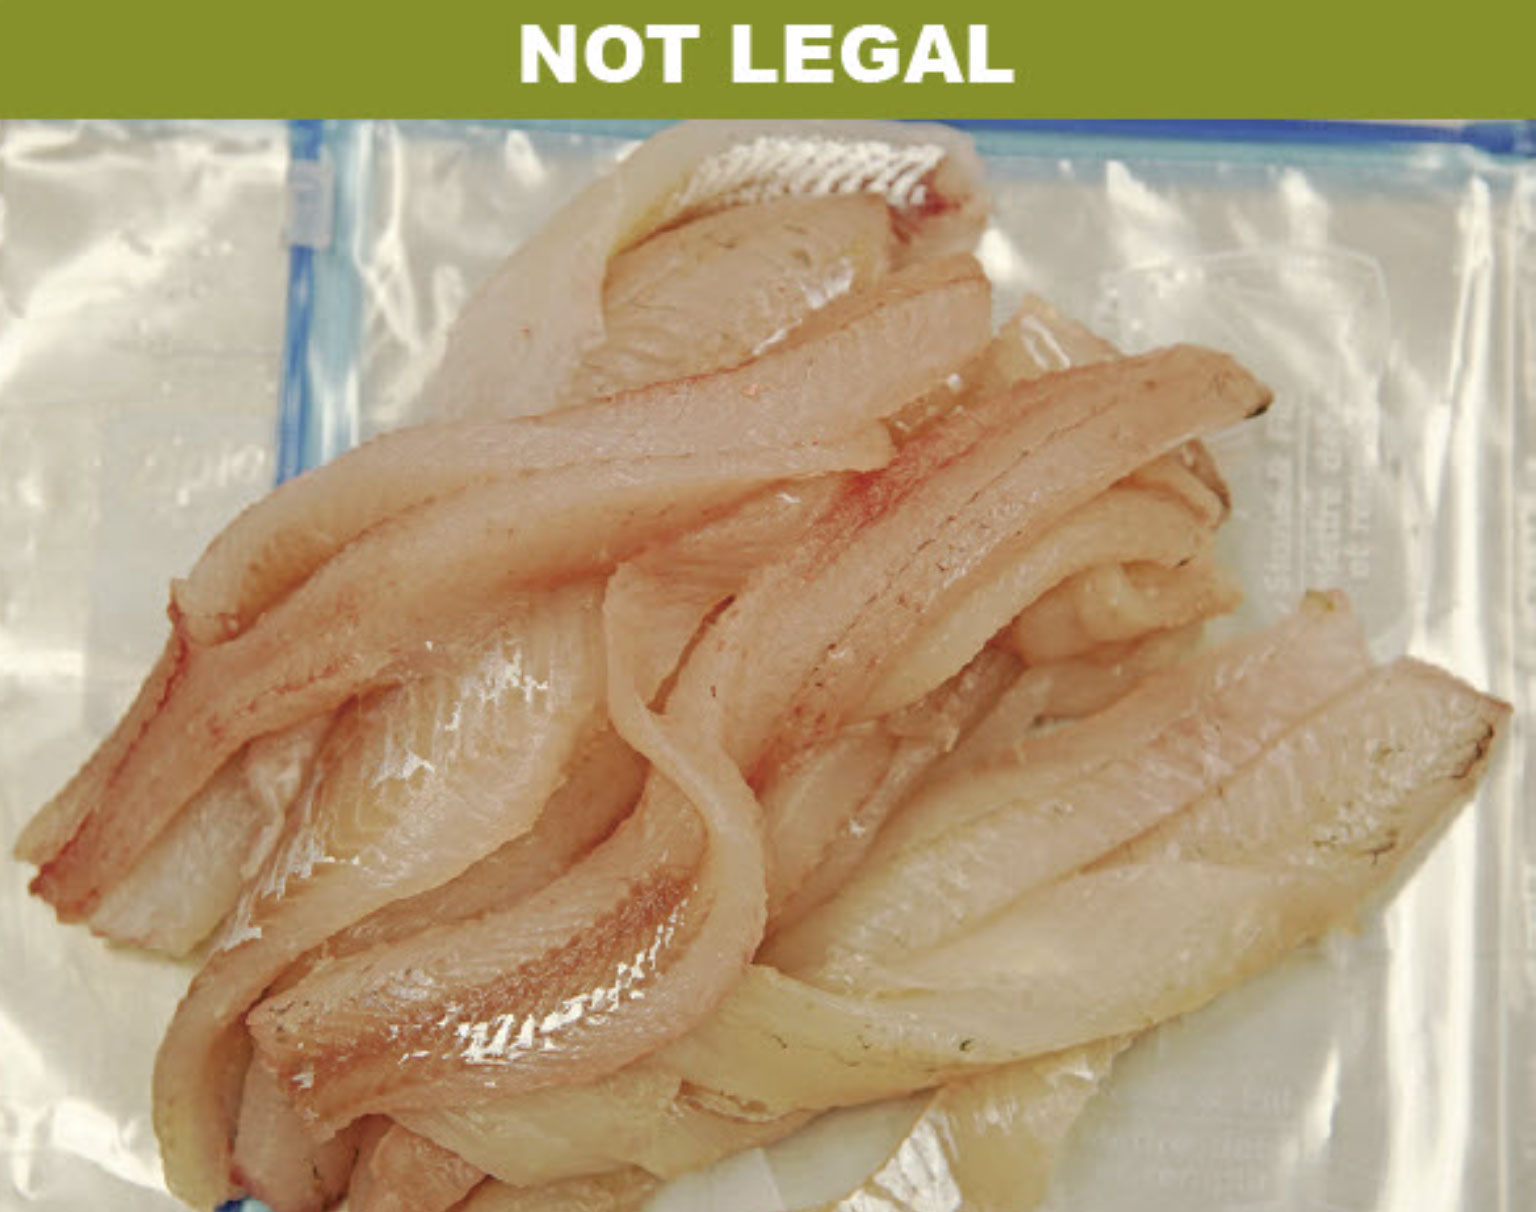 Multiple fillets in a package